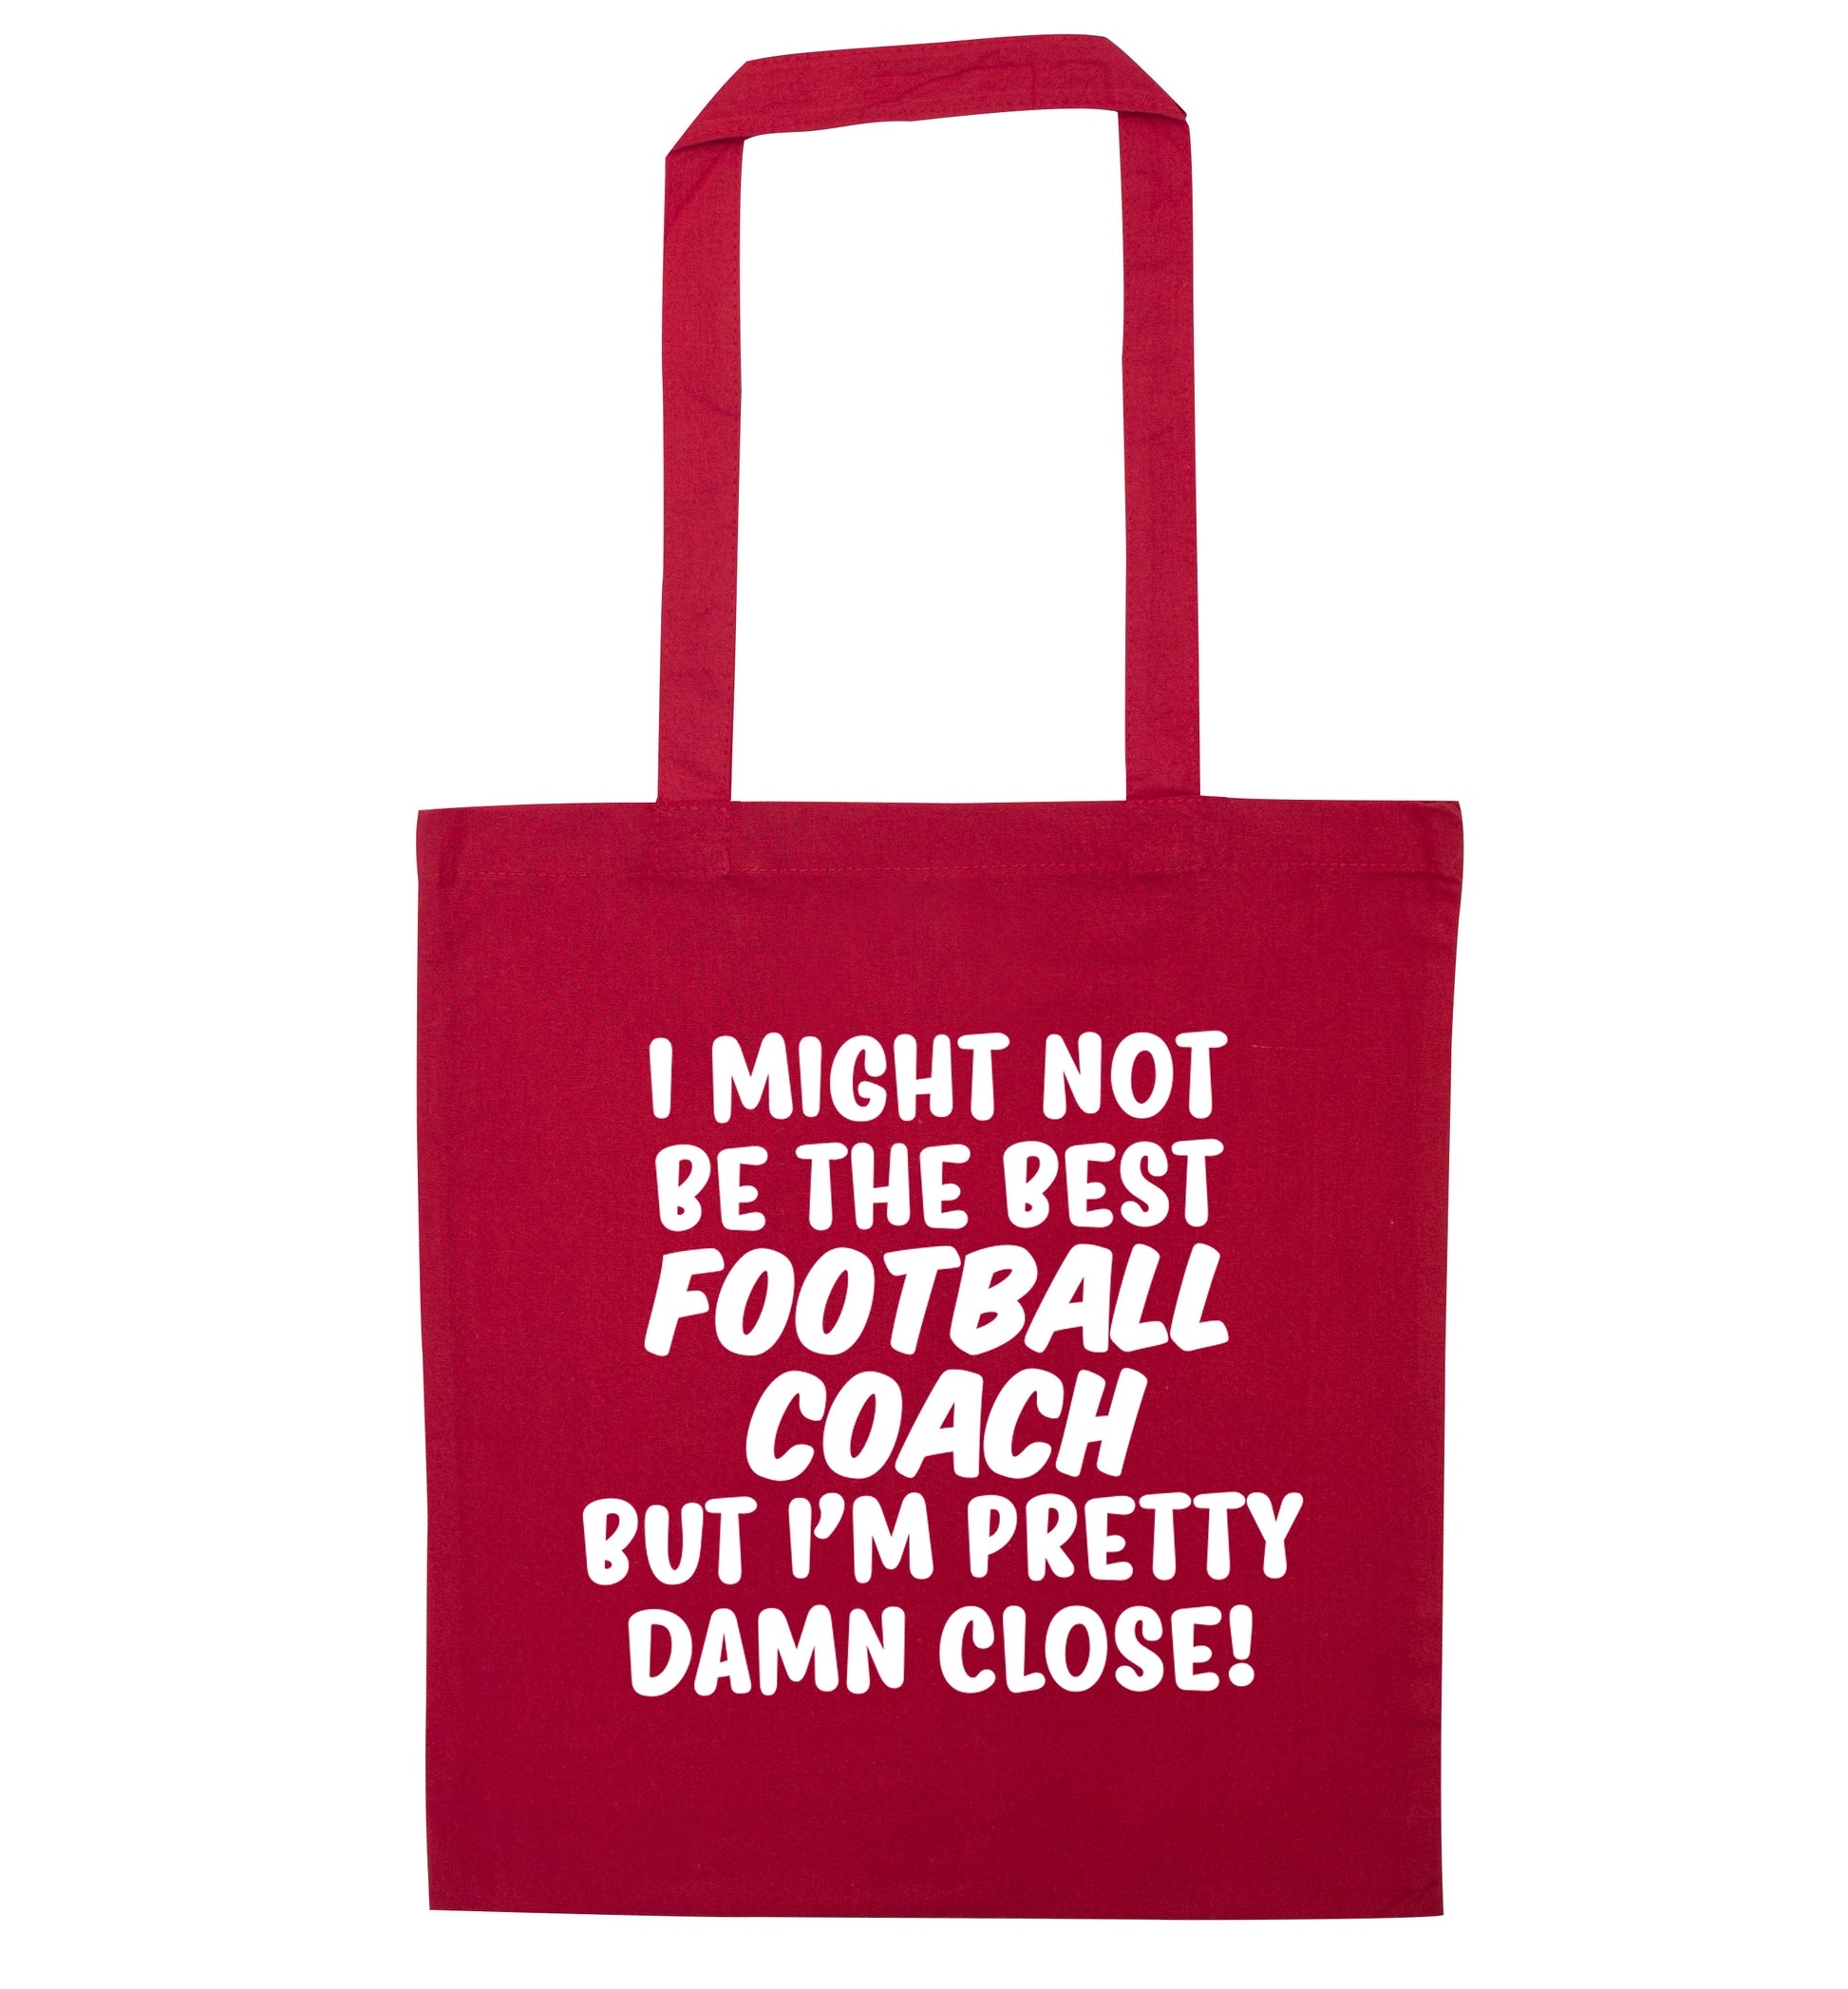 I might not be the best football coach but I'm pretty close! red tote bag